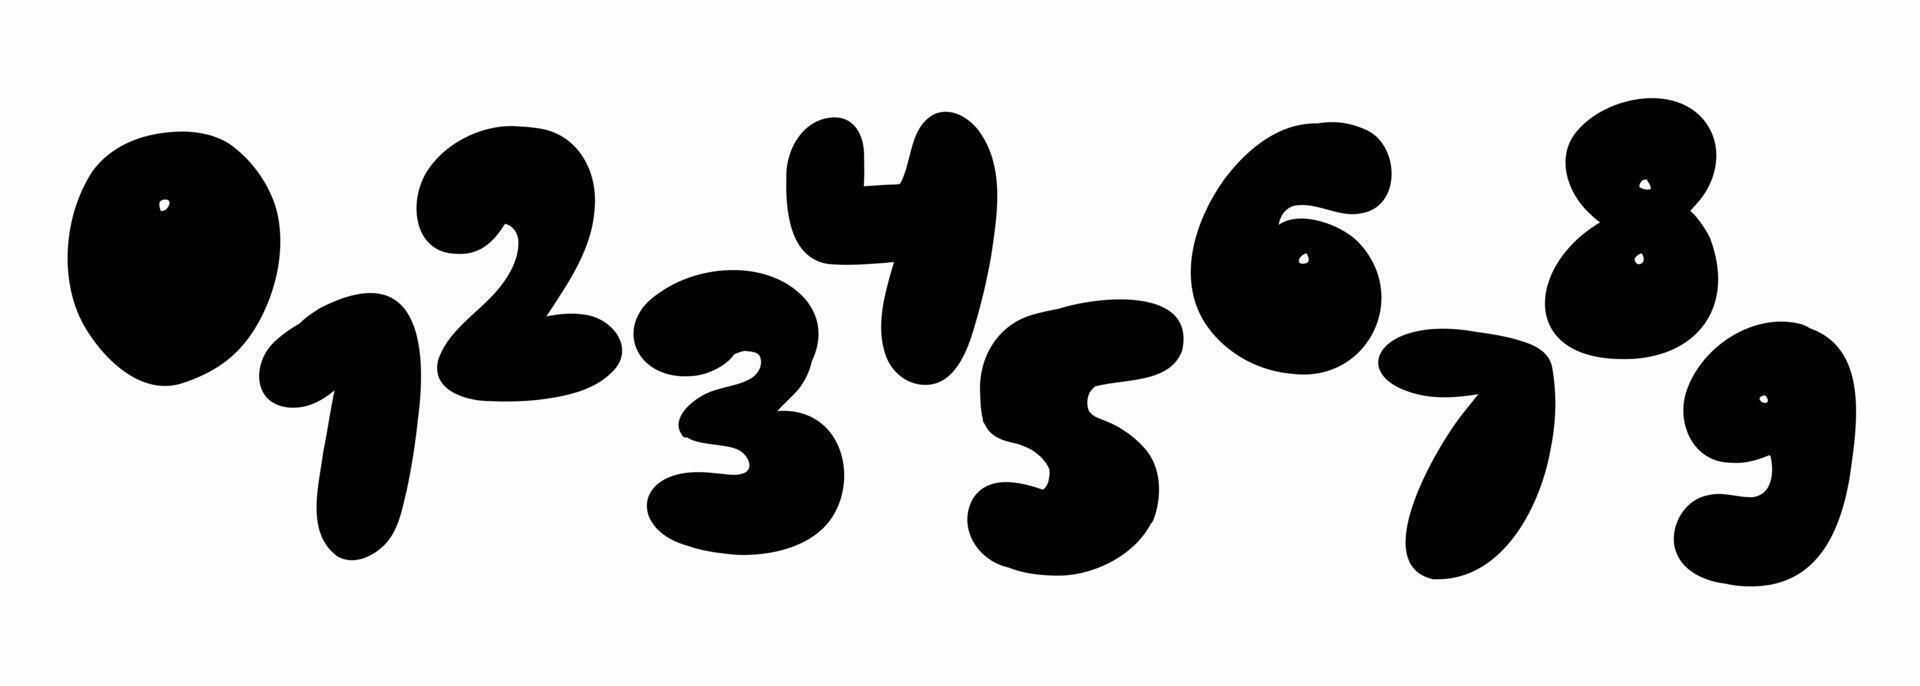 Hand drawn style digits numbers font vector